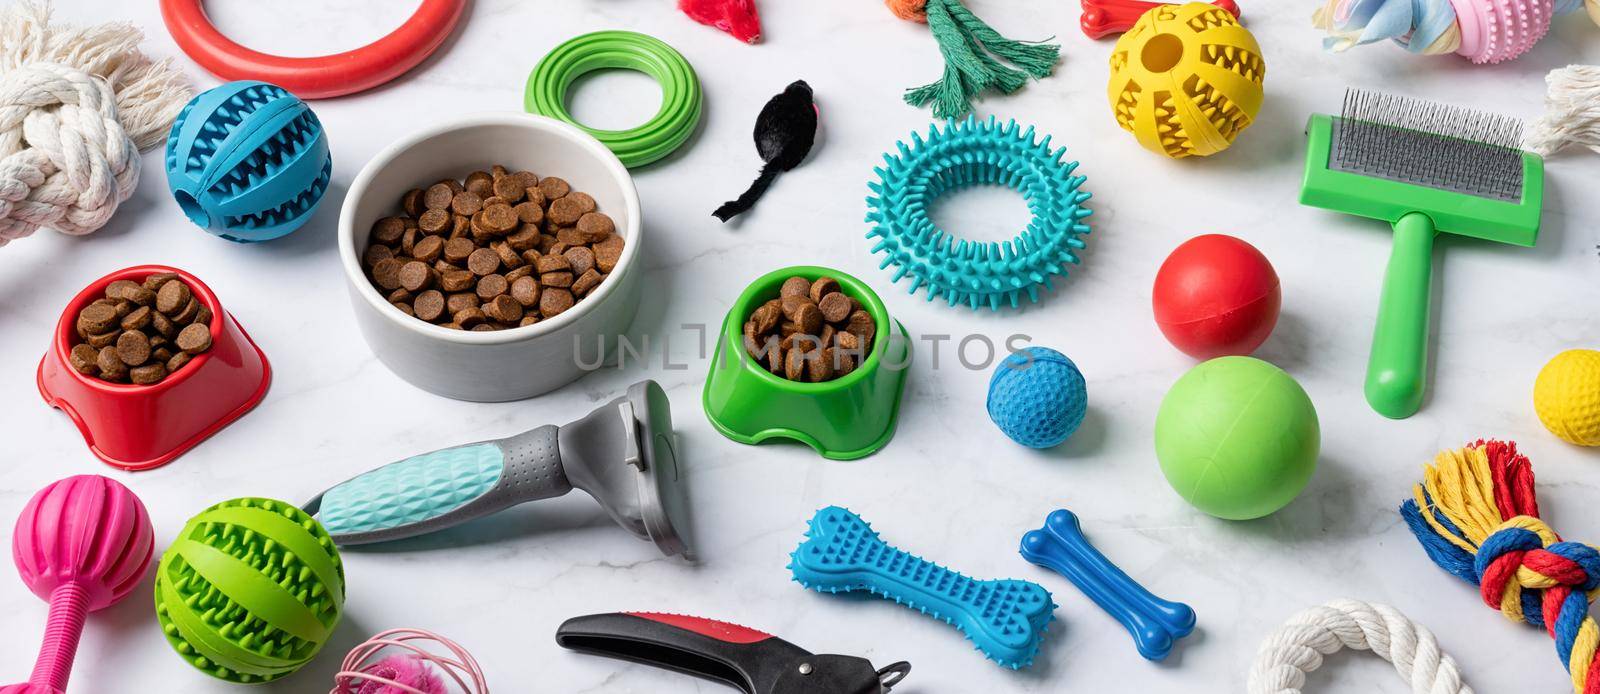 Pet care concept, various pet accessories and tools, toys, balls, brushes on white marble background, high angle